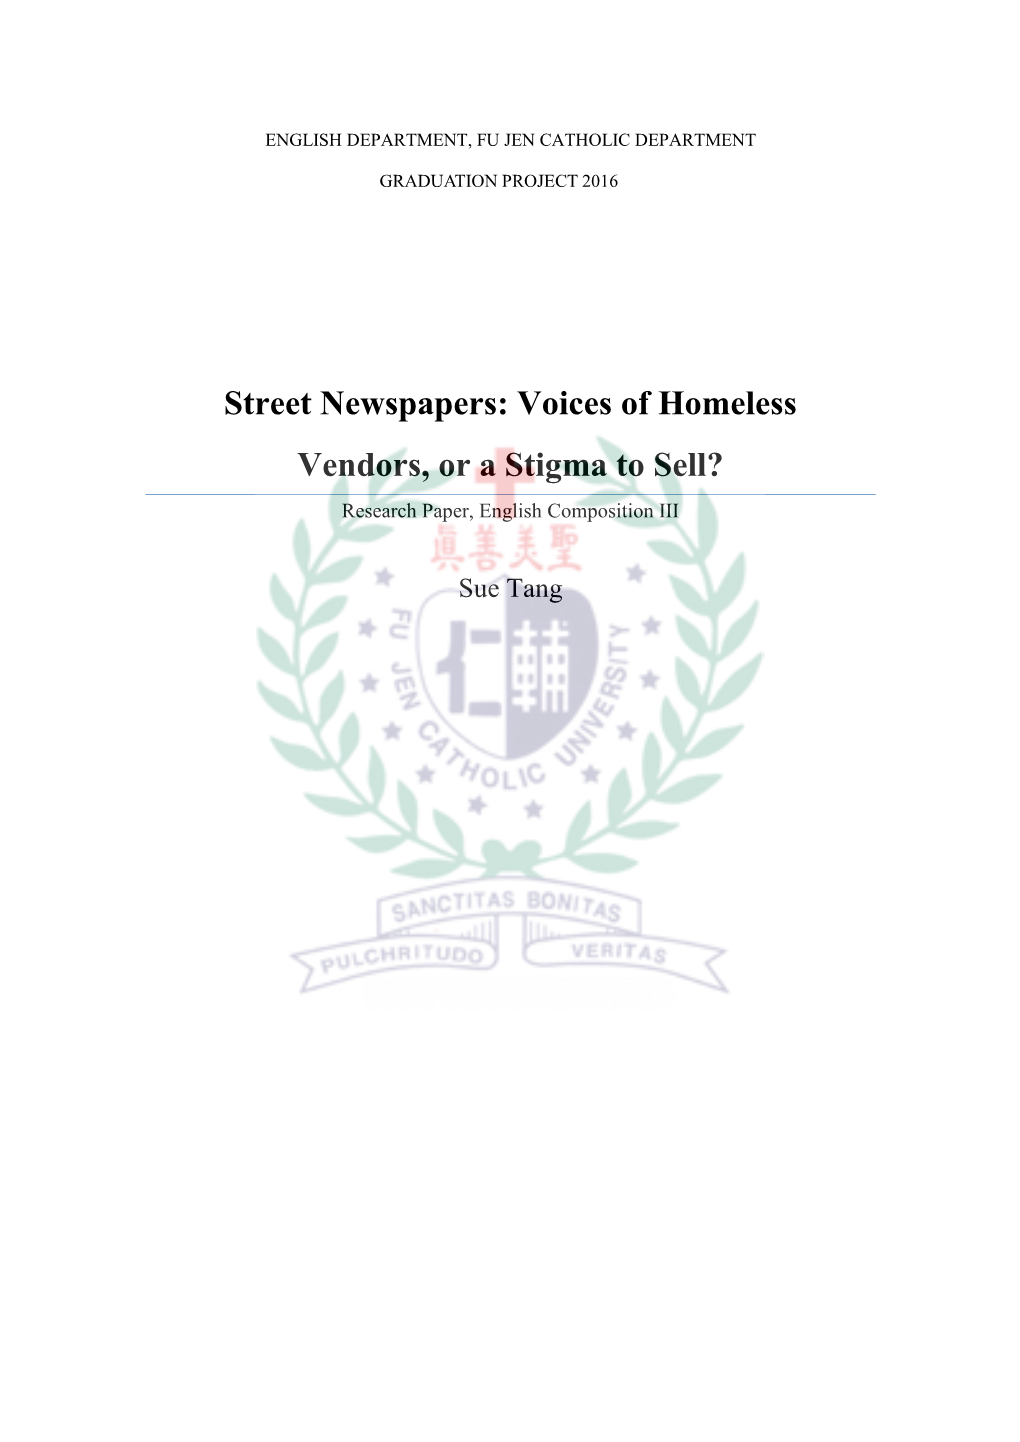 Street Newspapers: Voices of Homeless Vendors, Or a Stigma to Sell? Research Paper, English Composition III